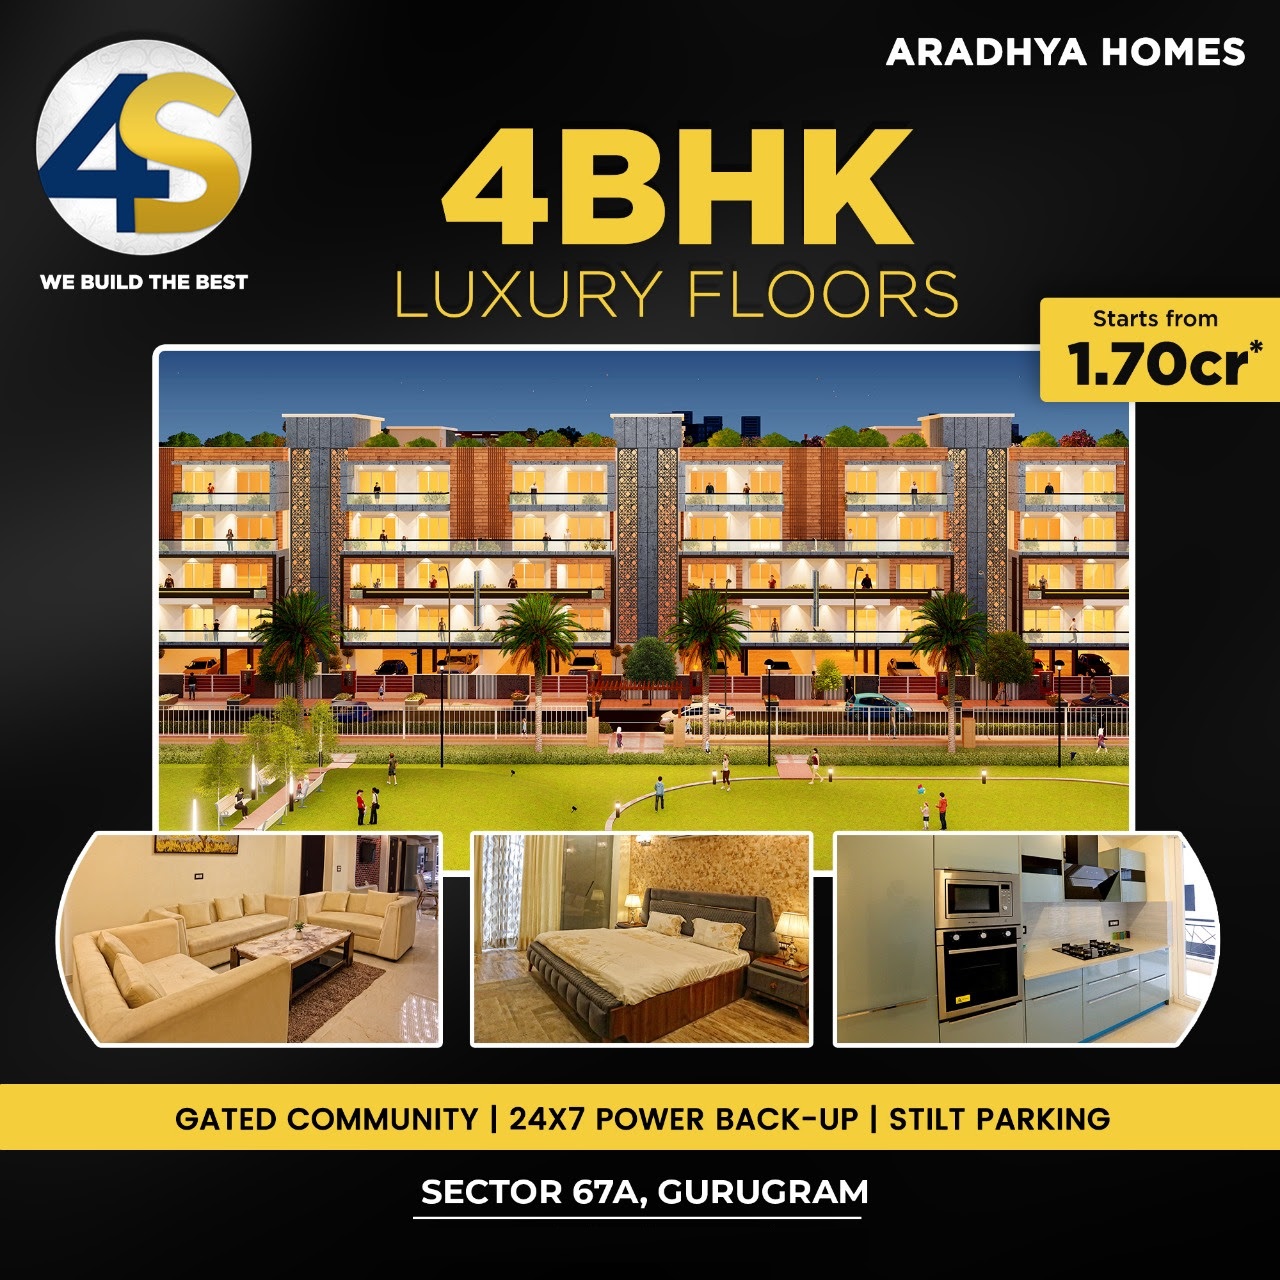 Book 4 BHK luxury floors price starting Rs 1.70 Cr at Aradhya Homes in Sector 67A, Gurgaon Update